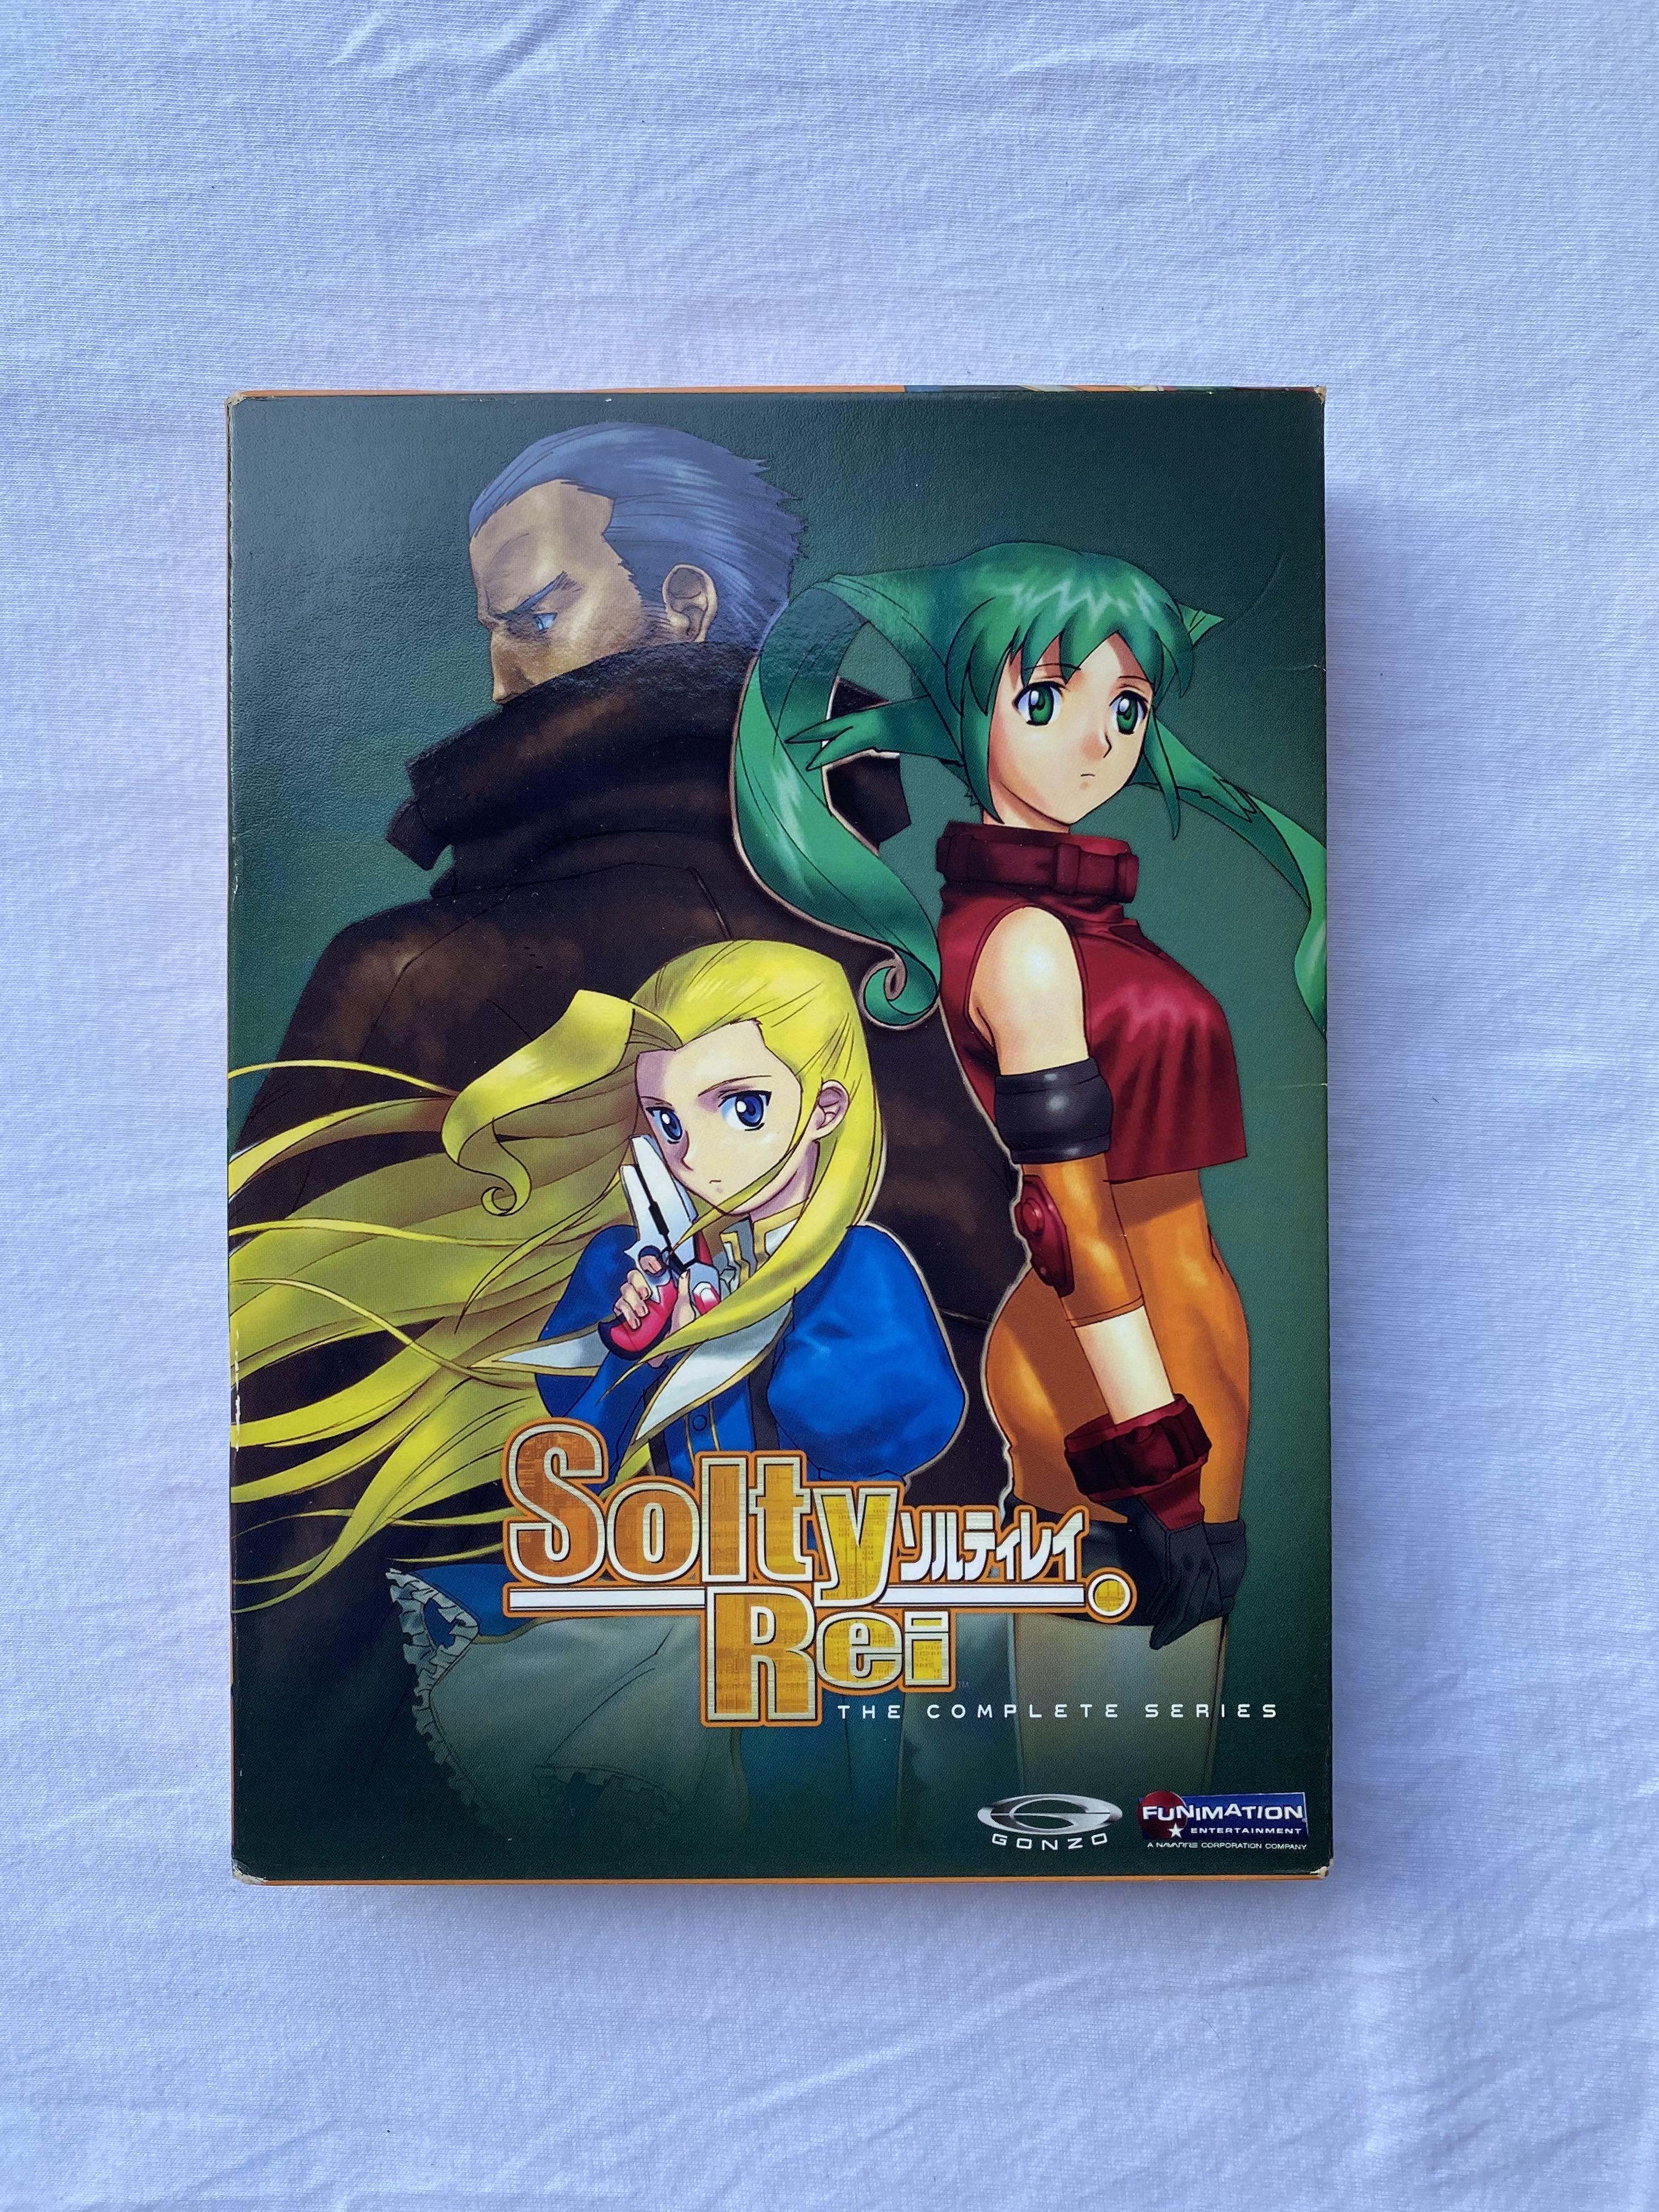 Original Anime Dvd Solty Rei Complete Series Hobbies And Toys Music And Media Cds And Dvds On